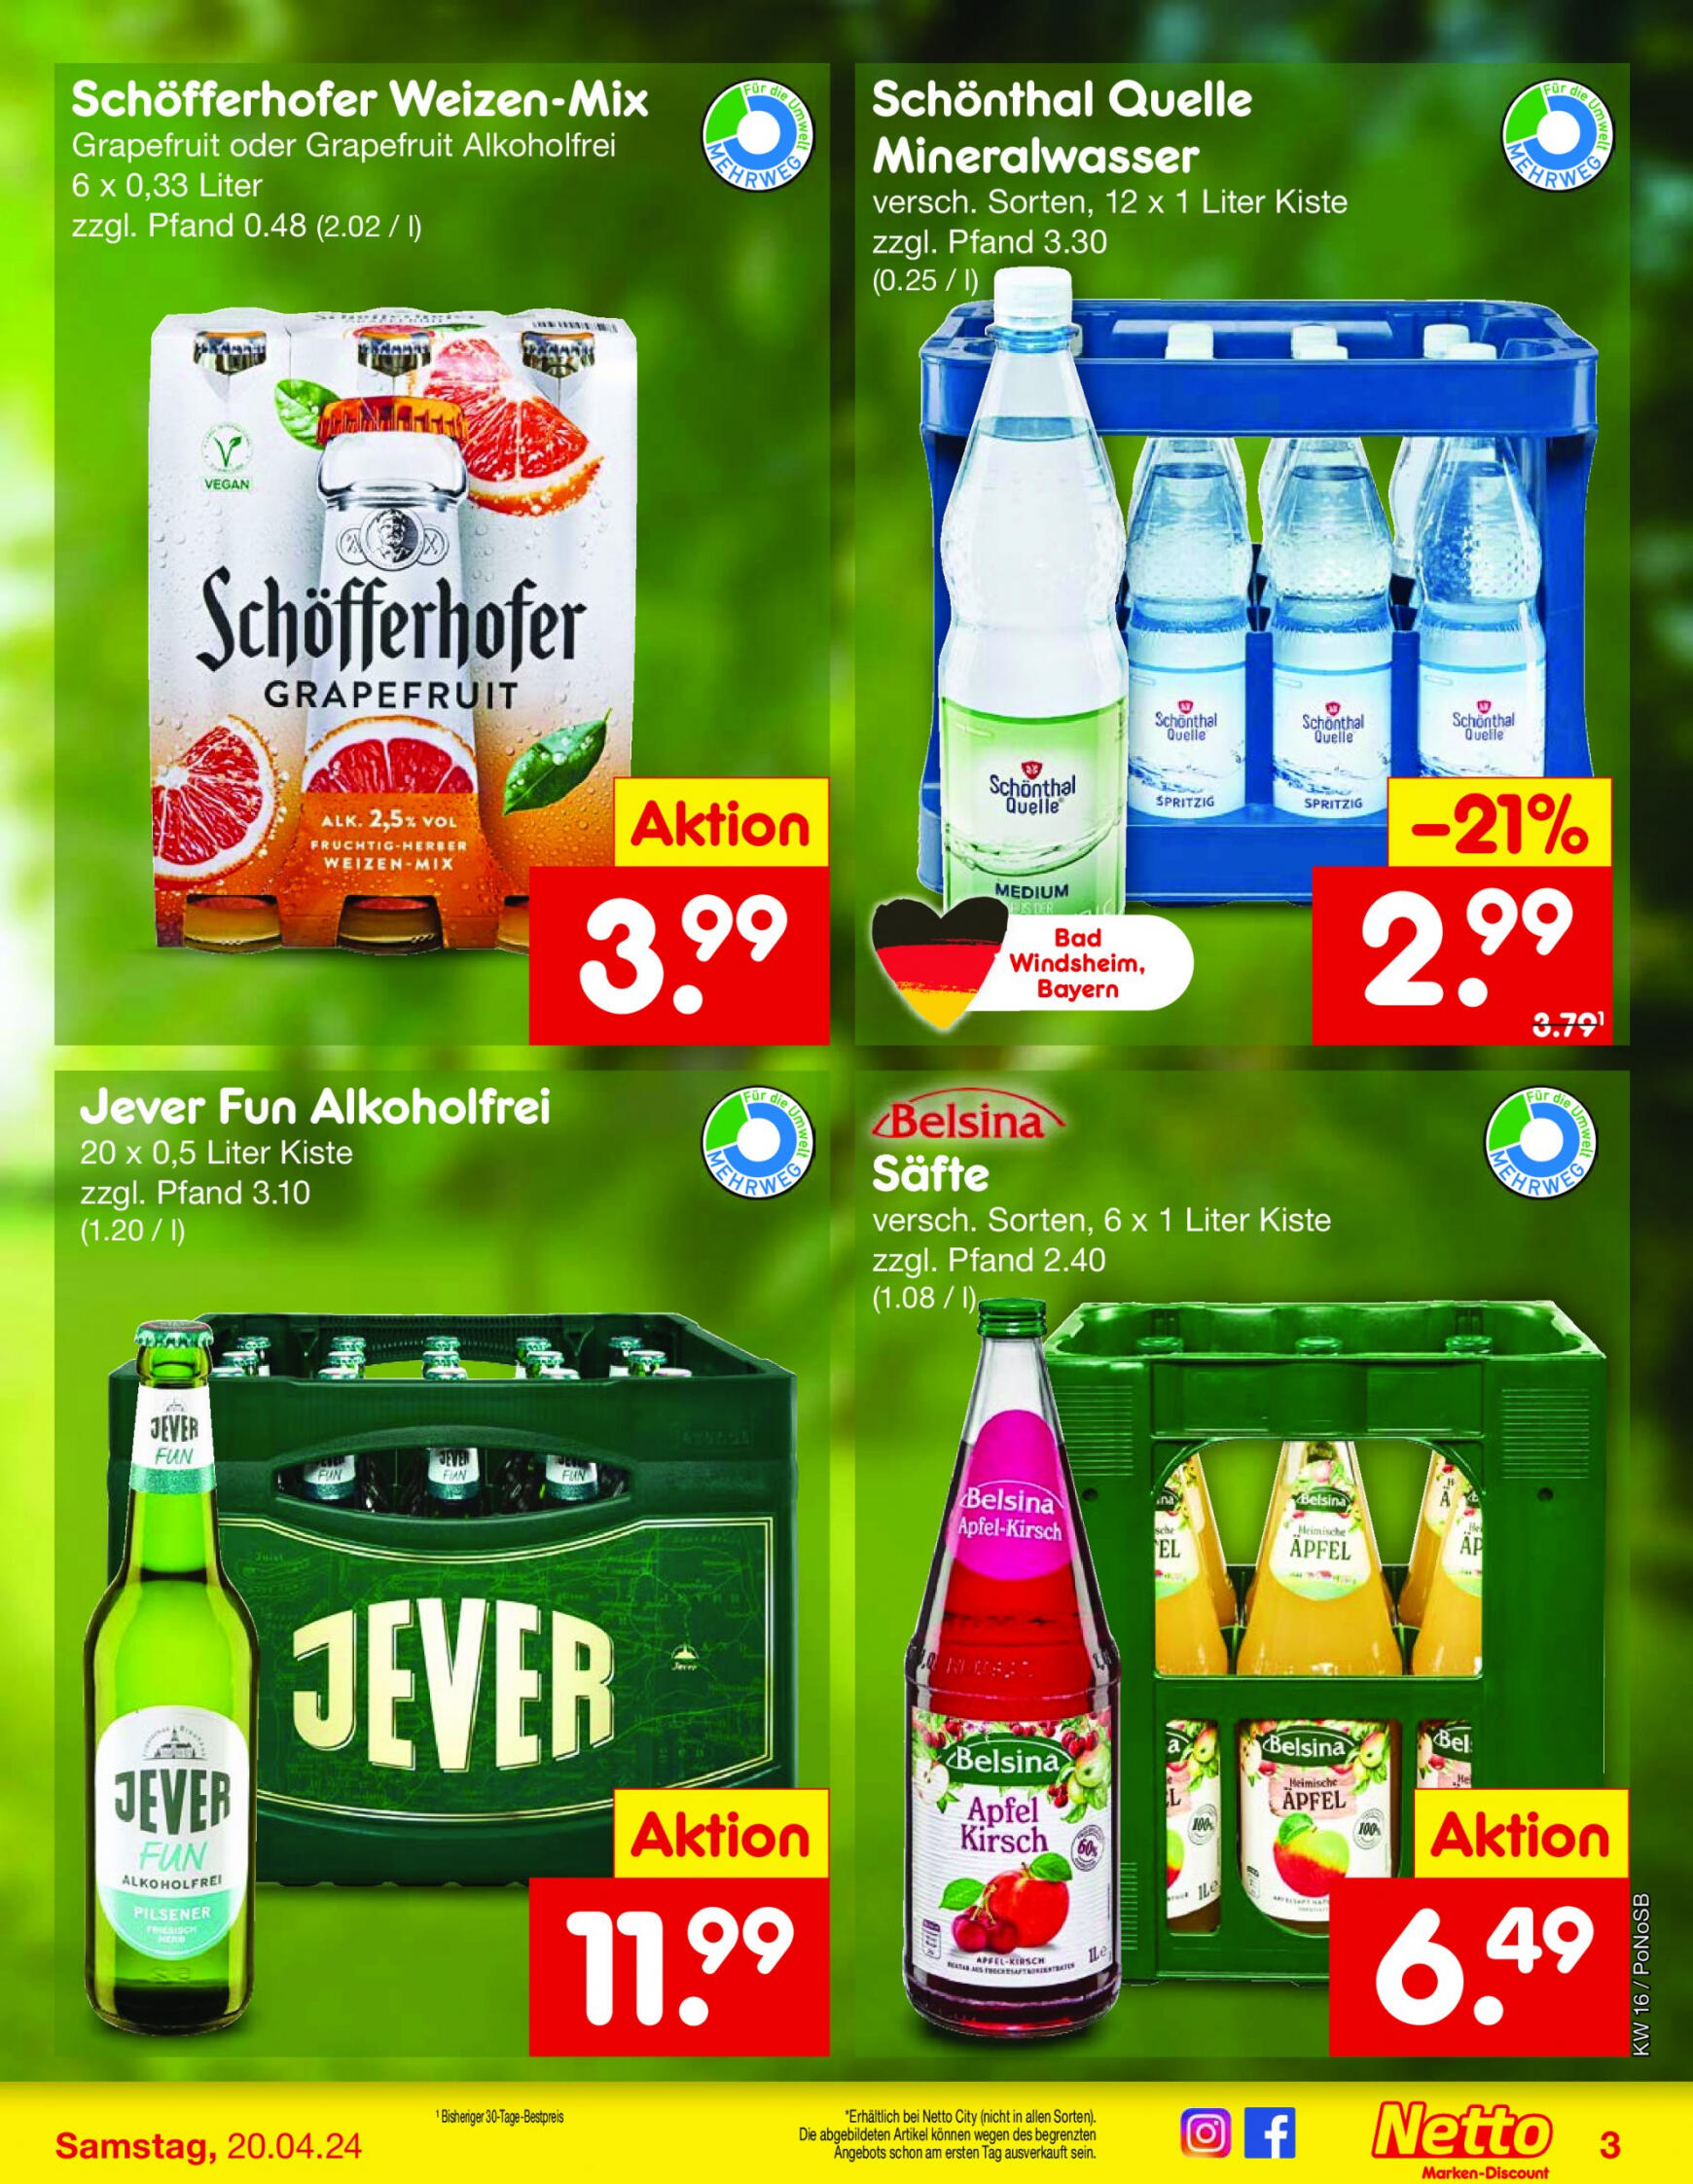 netto - Flyer Netto aktuell 15.04. - 20.04. - page: 23